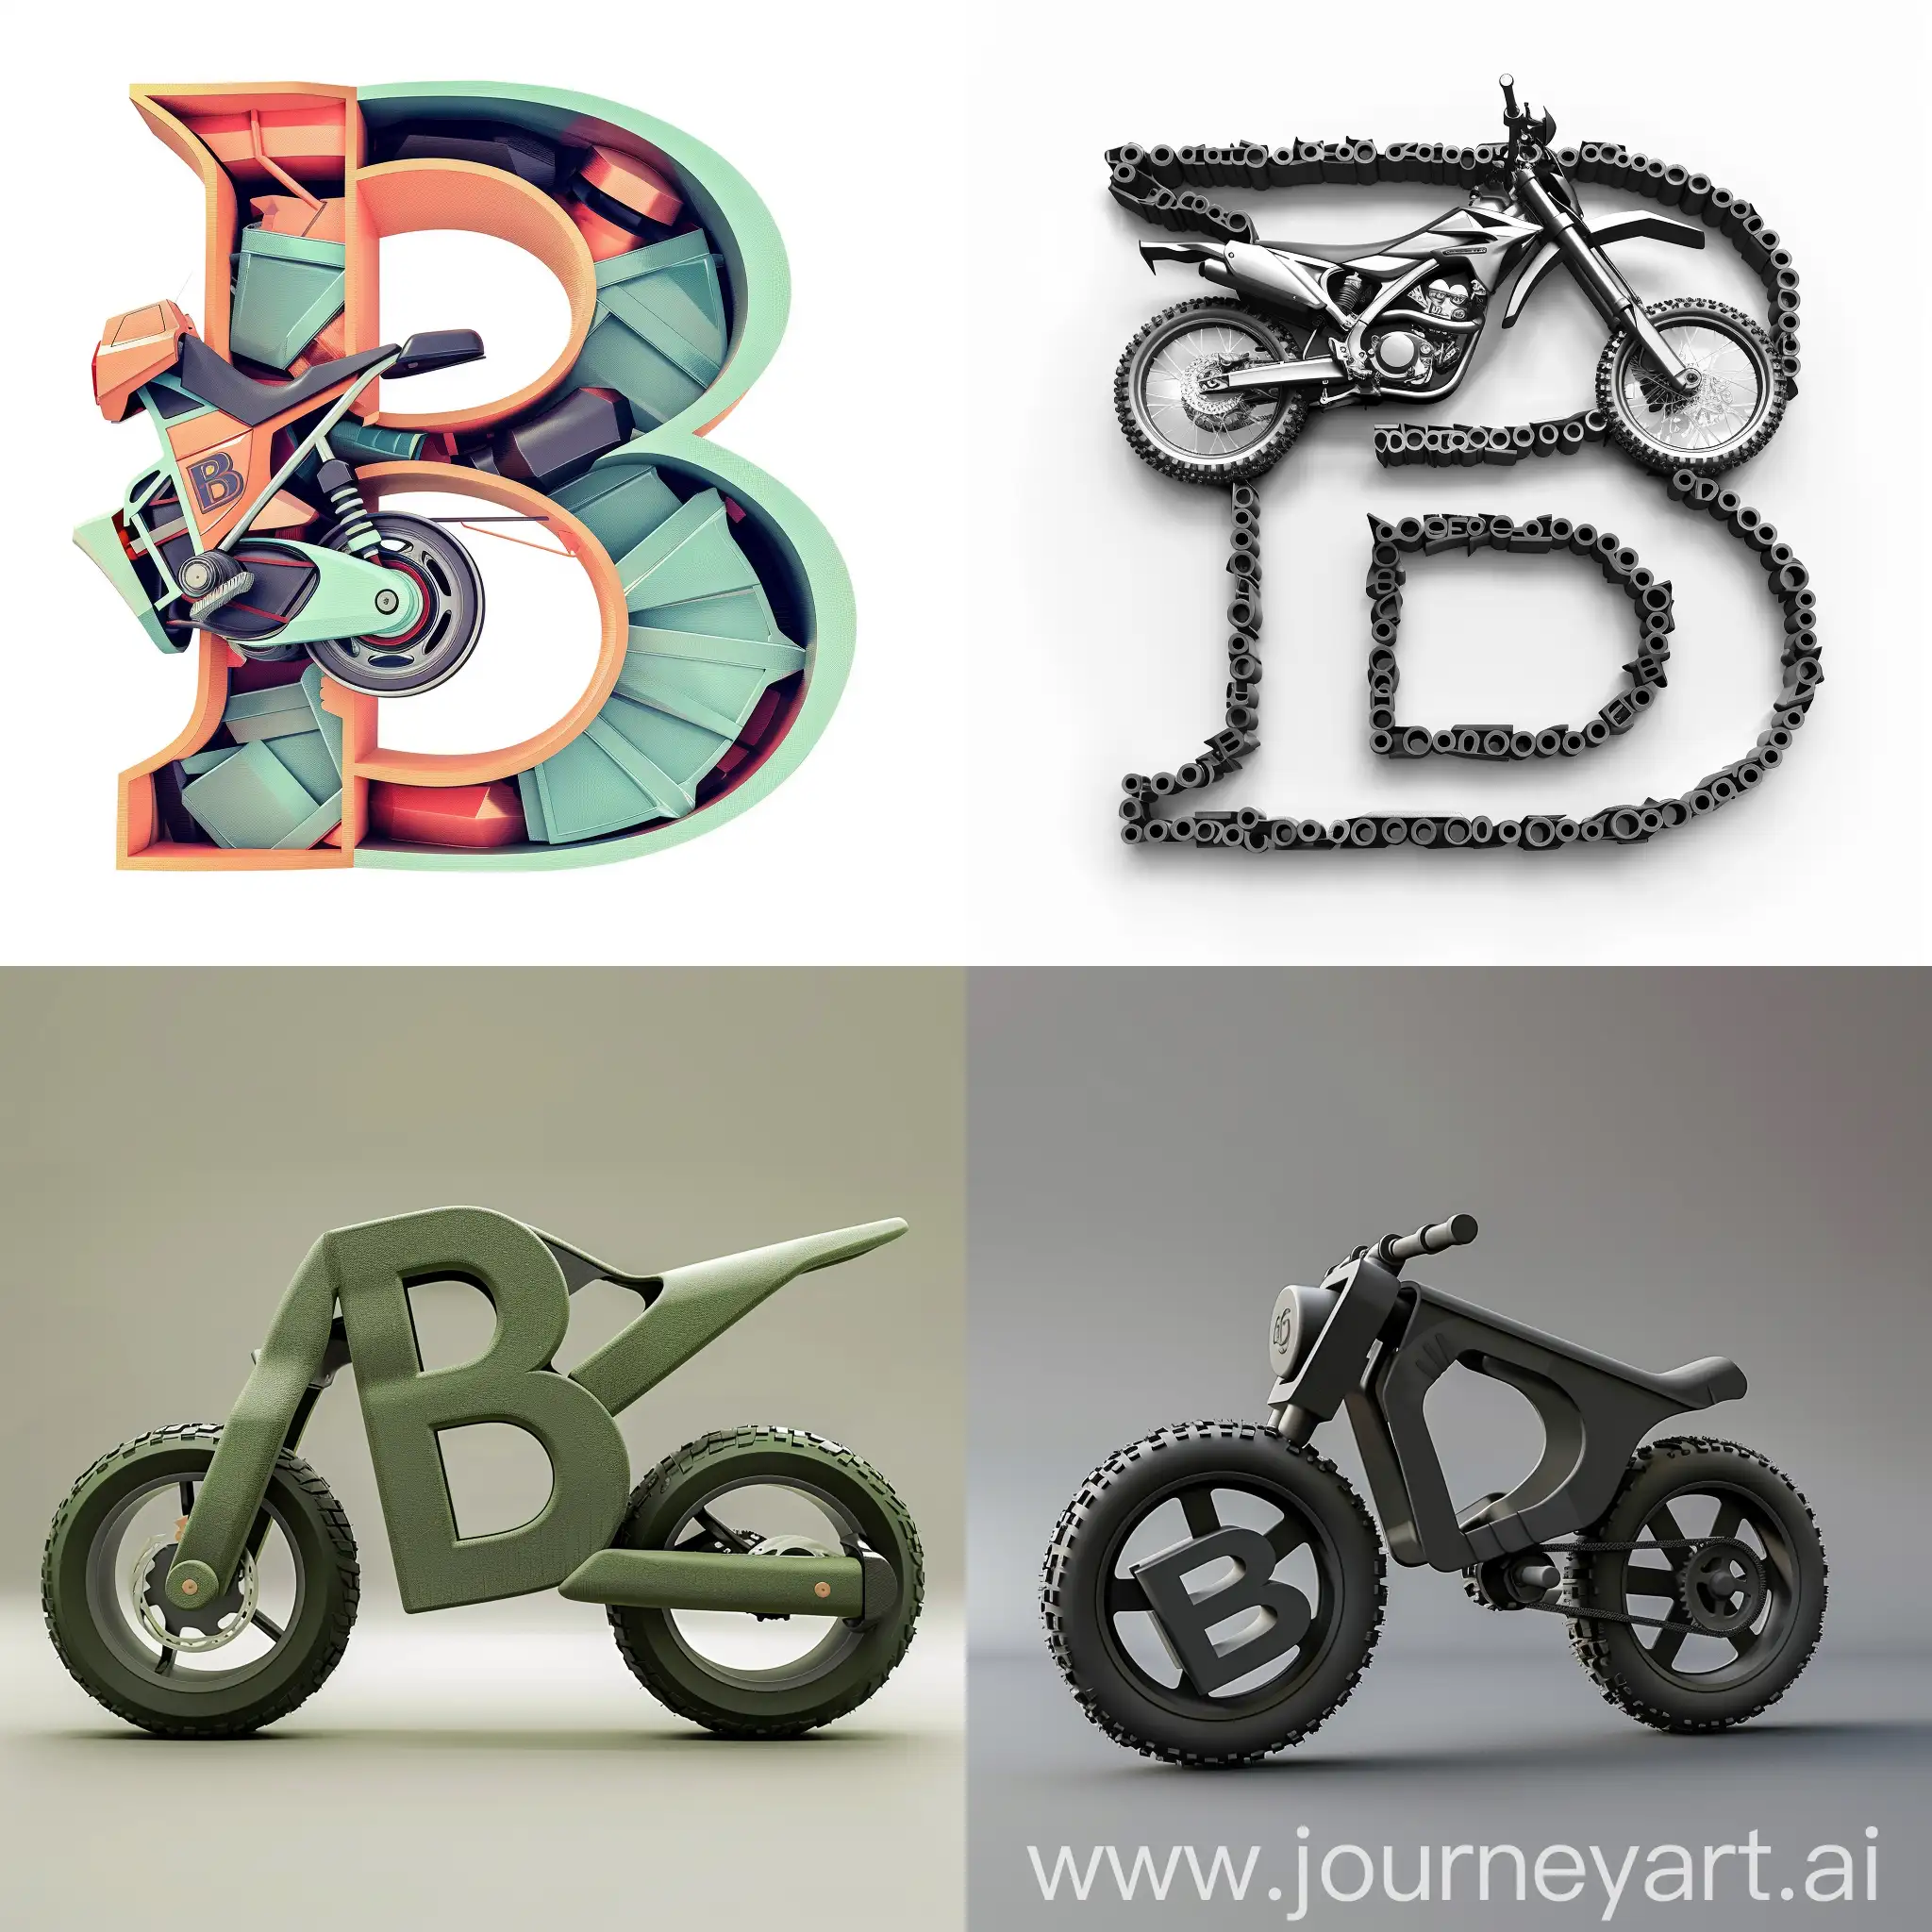 Letter B in form in the form of motobike 